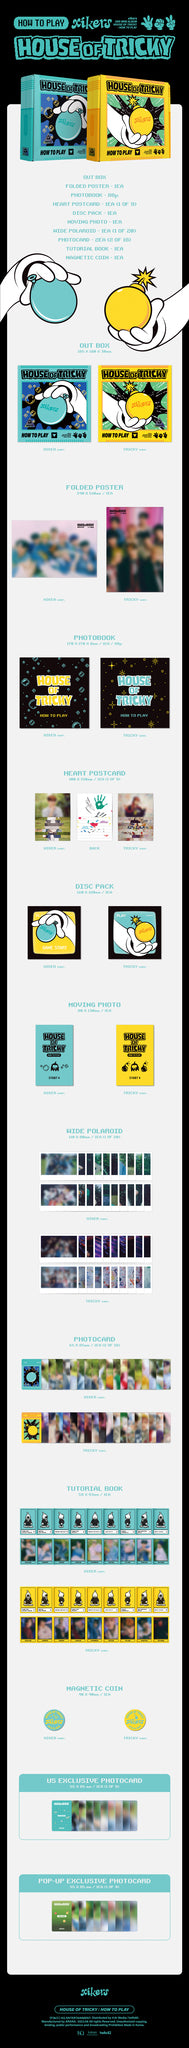 xikers - 2nd Mini-Album 'HOUSE OF TRICKY: HOW TO PLAY' (US Version) + Pop-up Exclusive Photocard